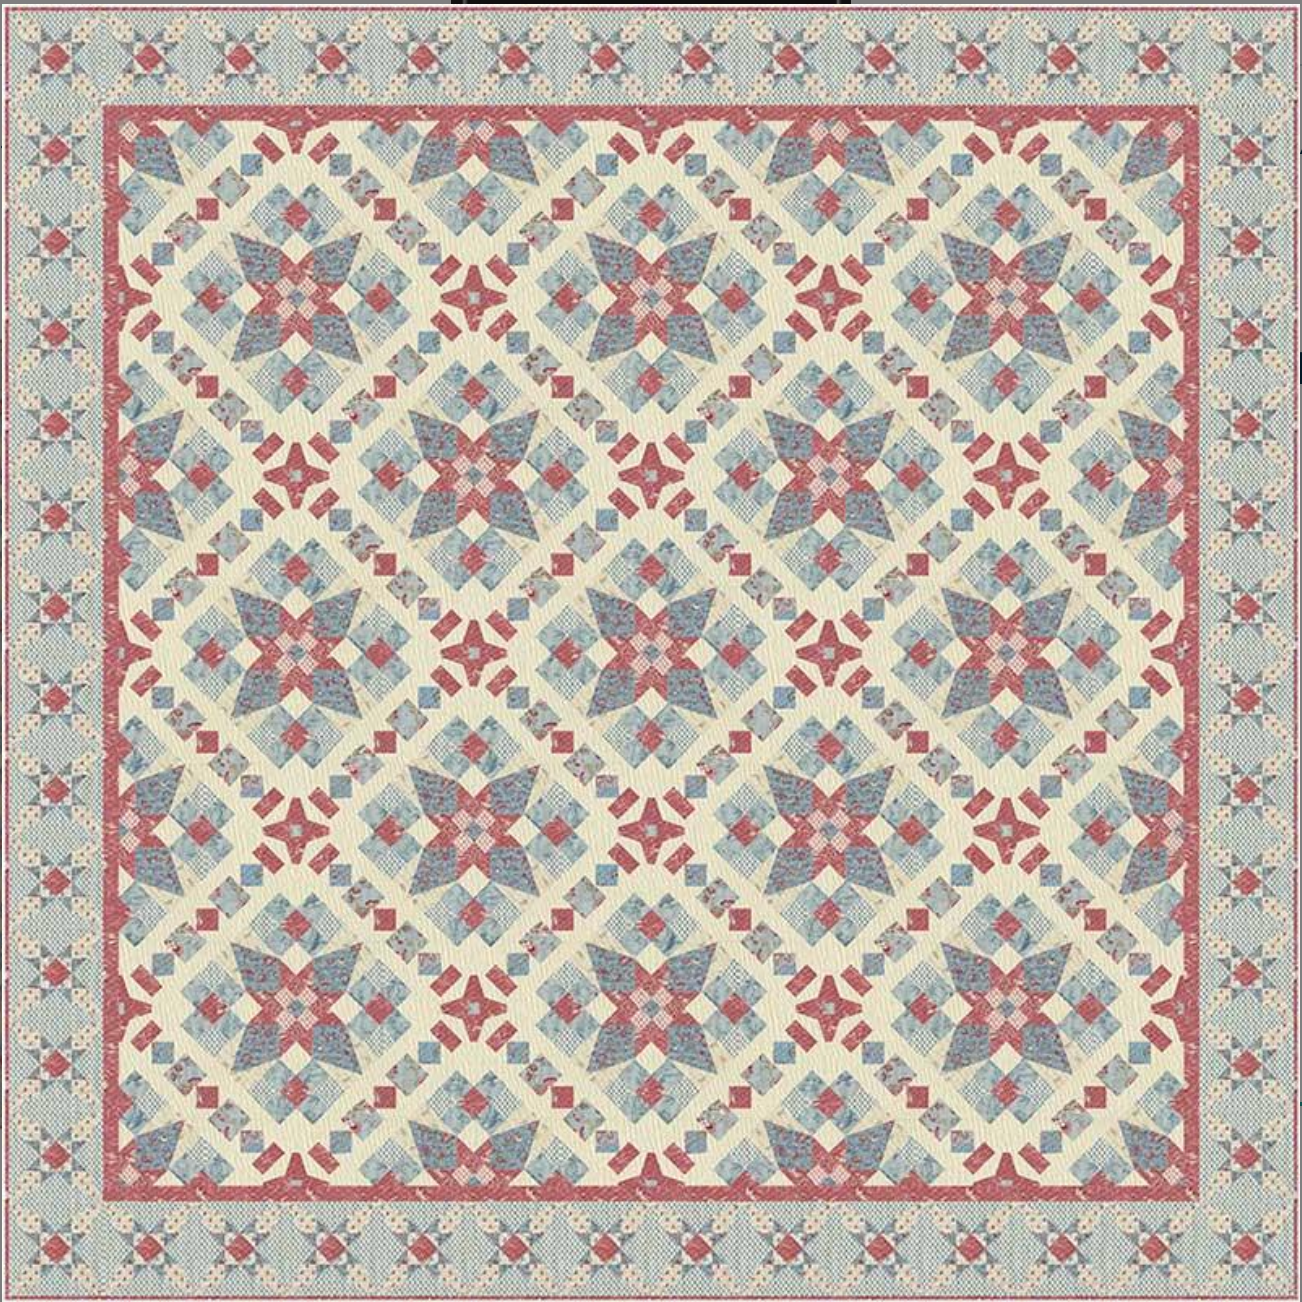 French General ~ Petit Trianon Quilt Pattern